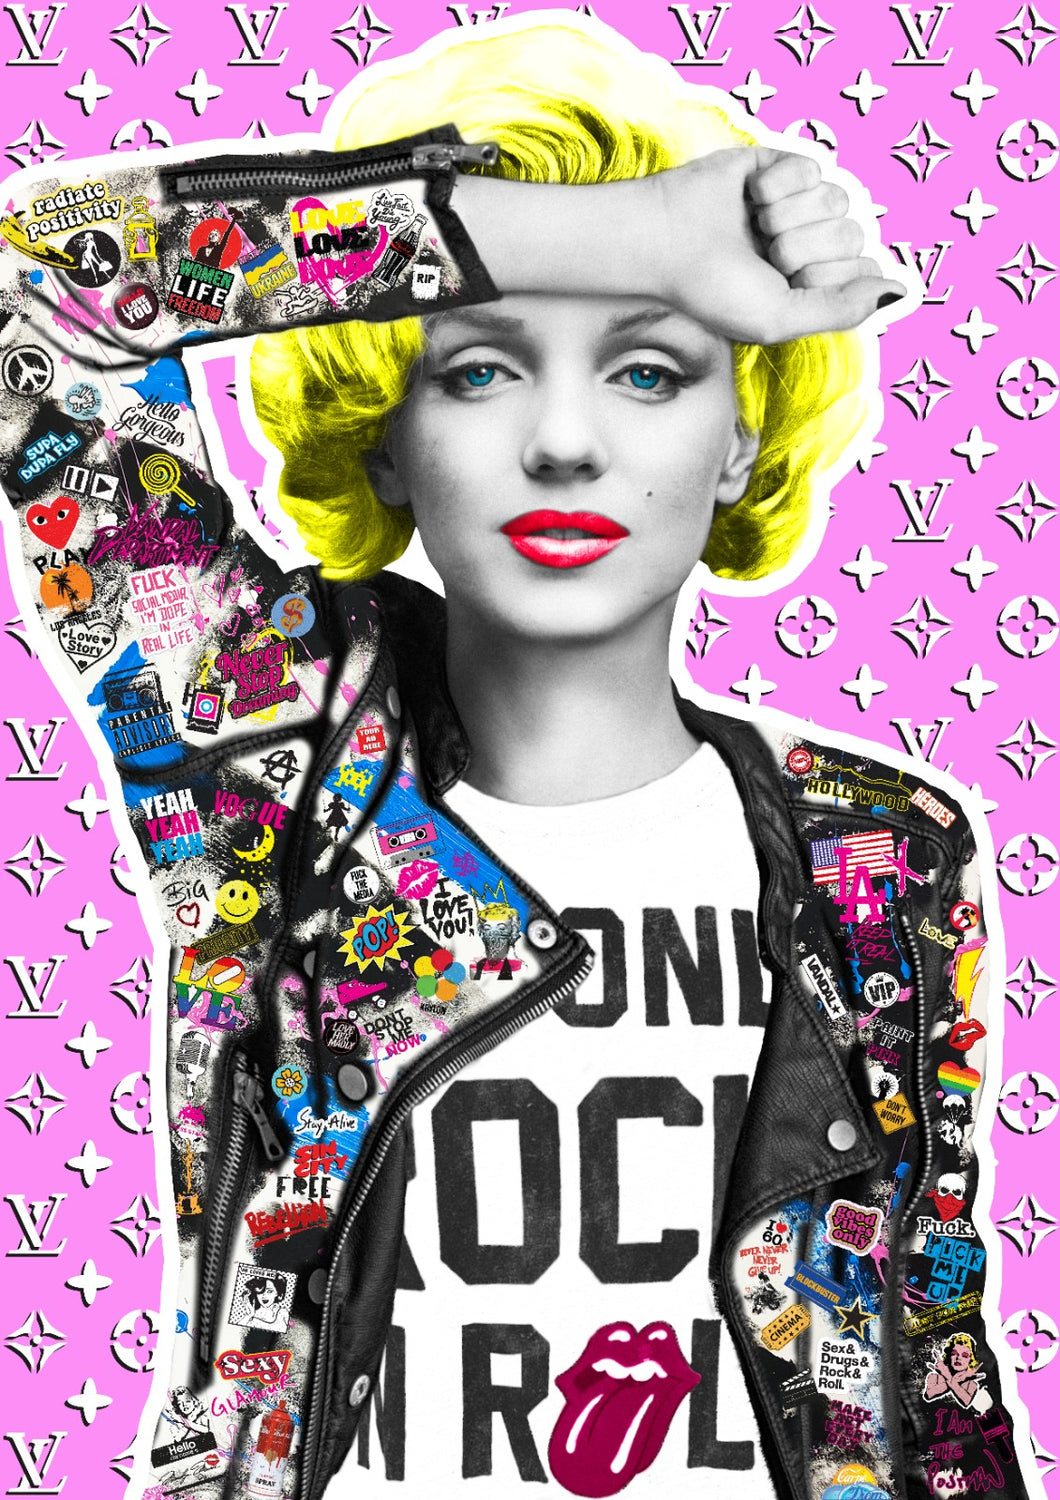 Marilyn - The Postman - Hand Finished A2 Giclee Print PREORDER